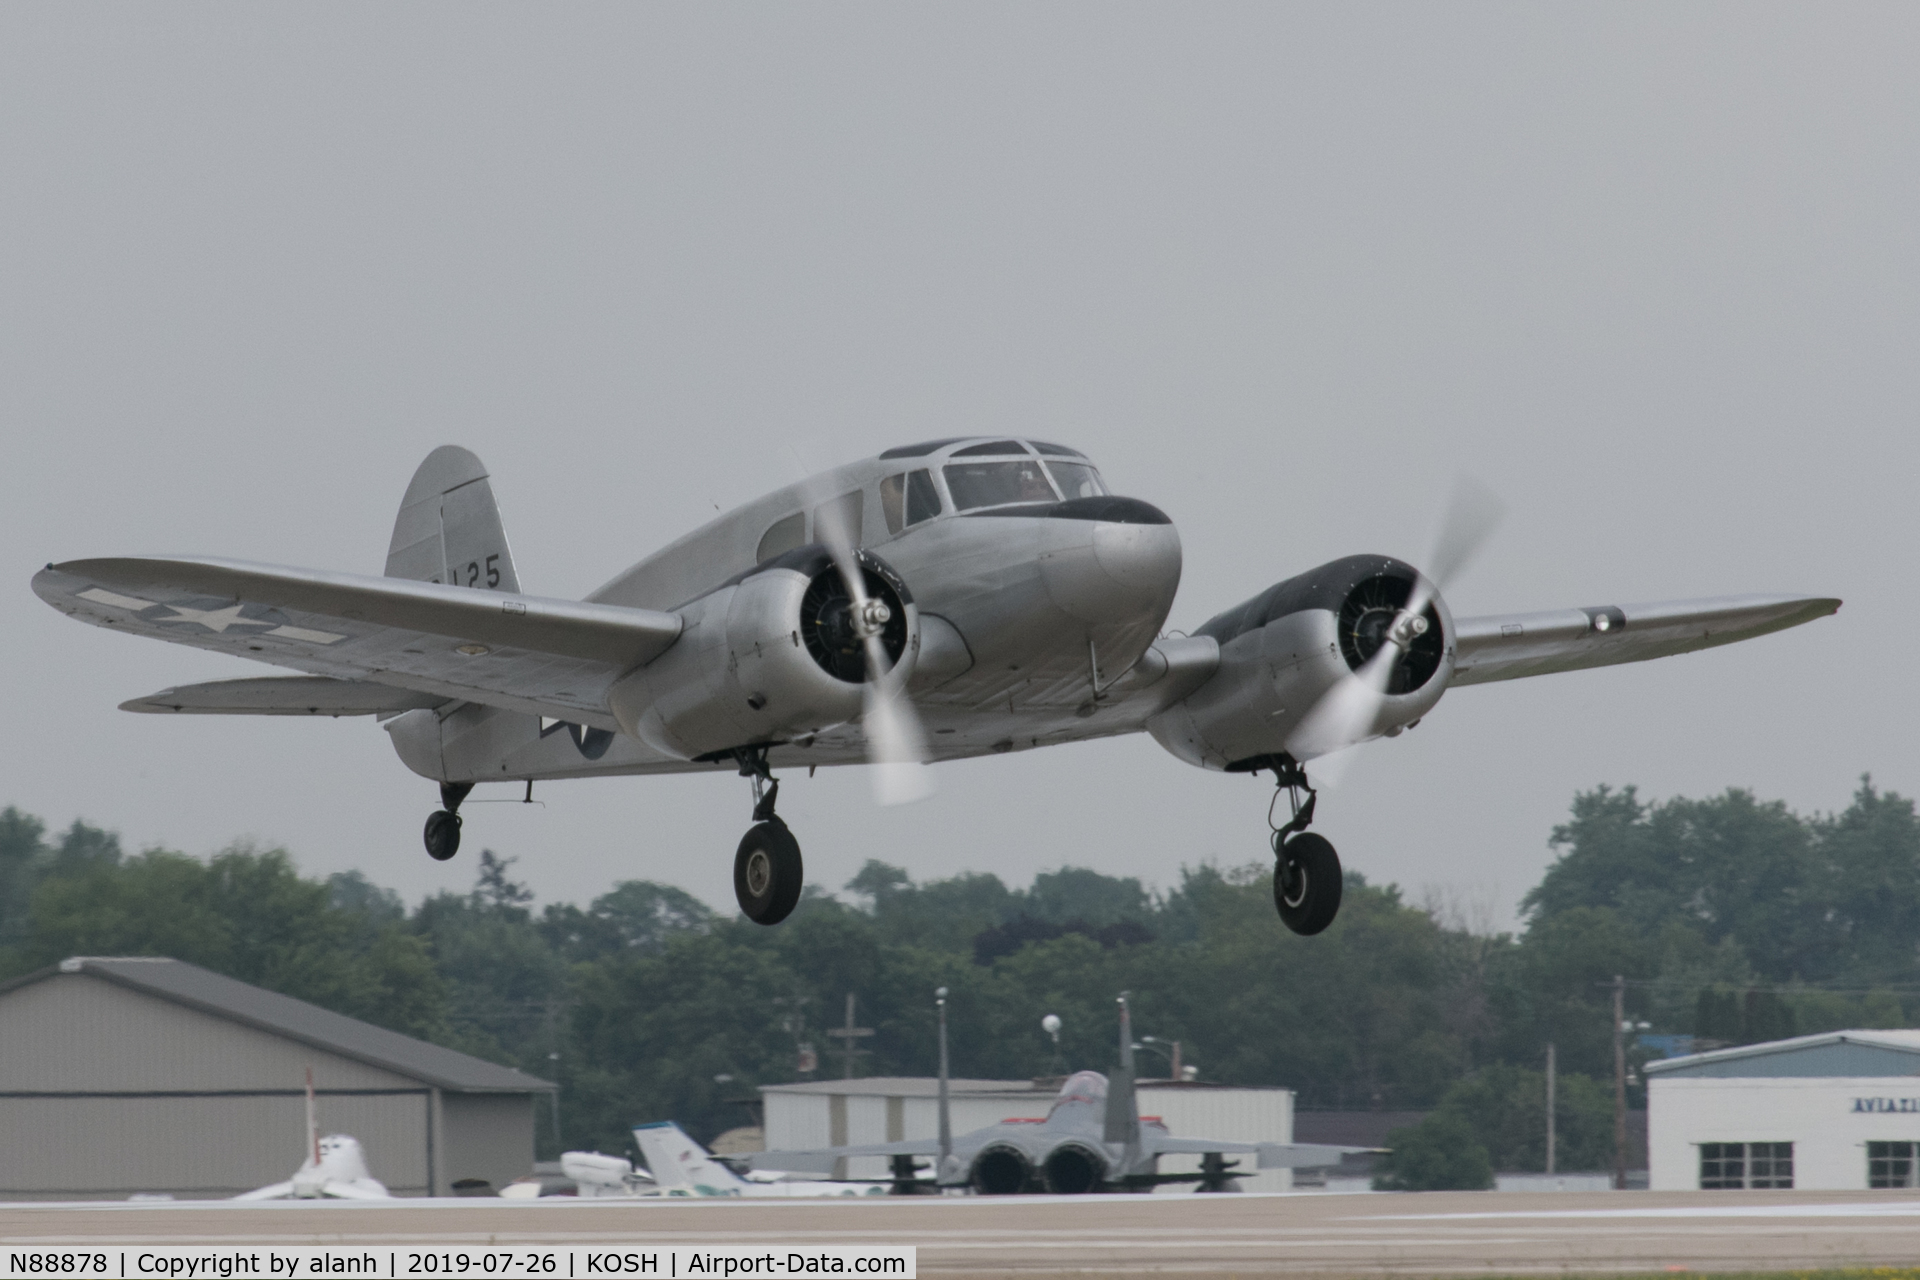 N88878, 1943 Cessna UC-78C (T-50) Bobcat C/N 4121, Taking off to display on a rare grey day at AirVenture 2019. This picture dedicated to my late friend Geoff Jones whose third attempt to photograph this aircraft air-to-air was foiled by reluctant engines.